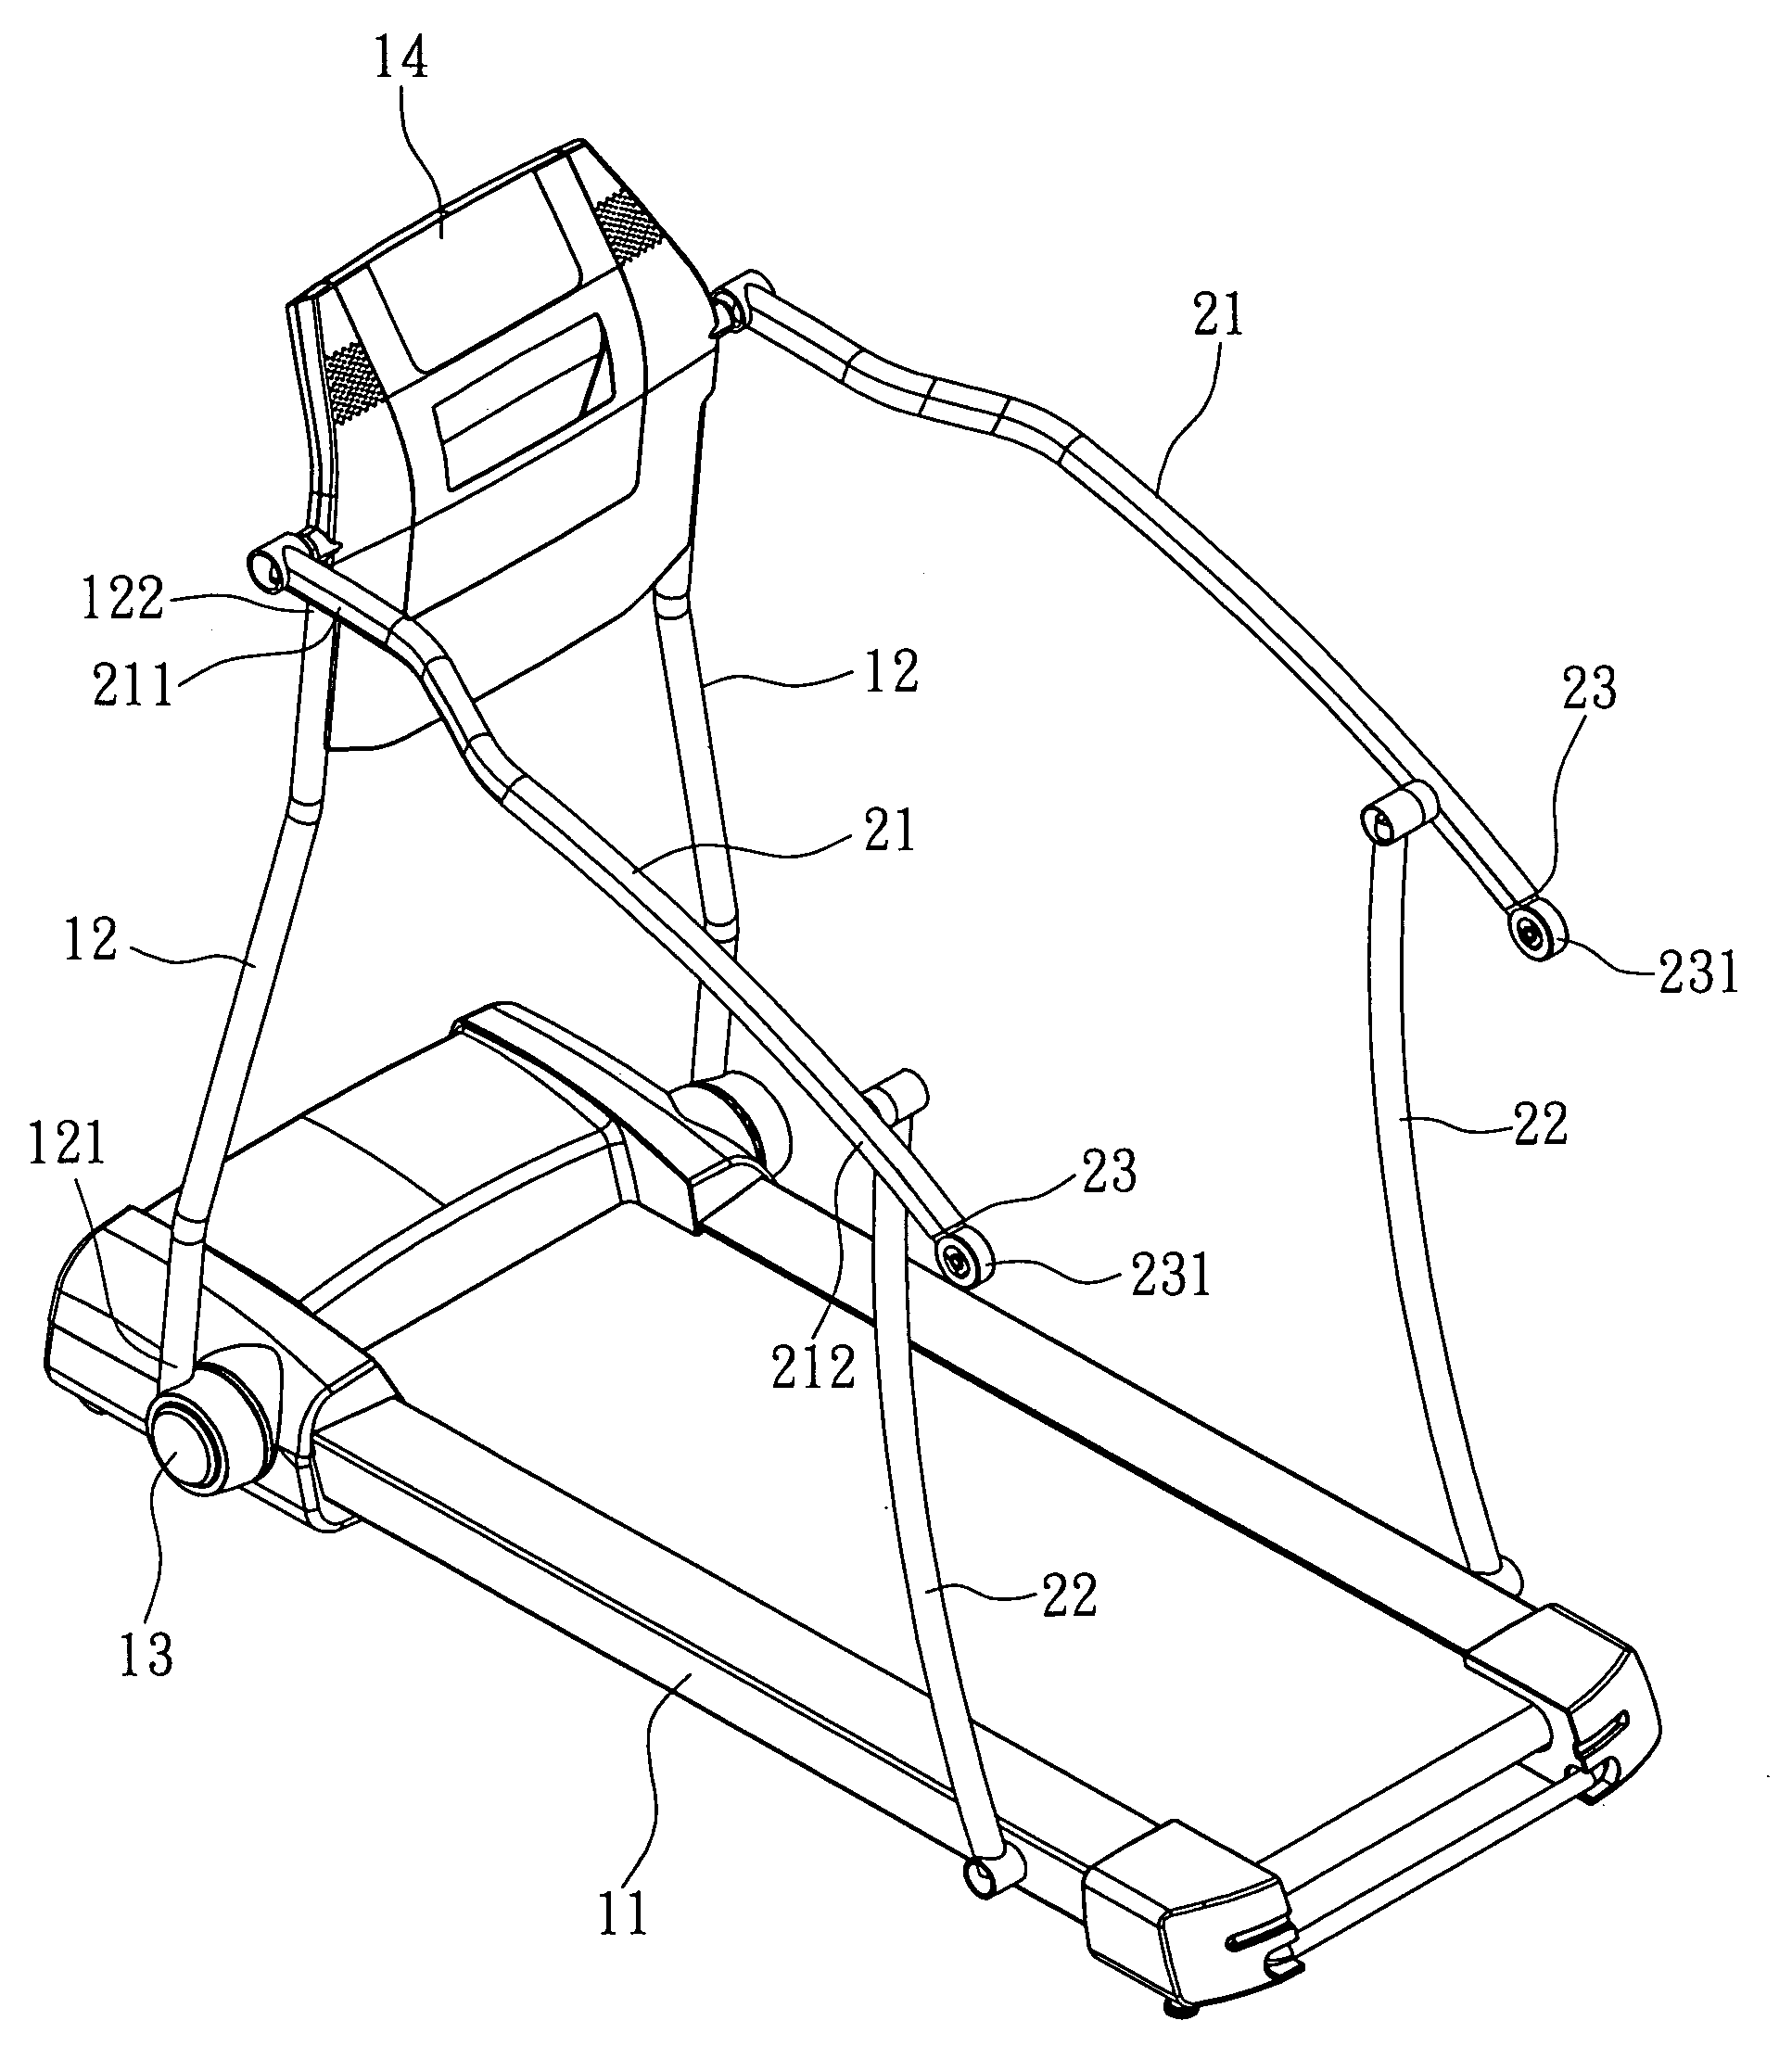 Folding structure of a treadmill